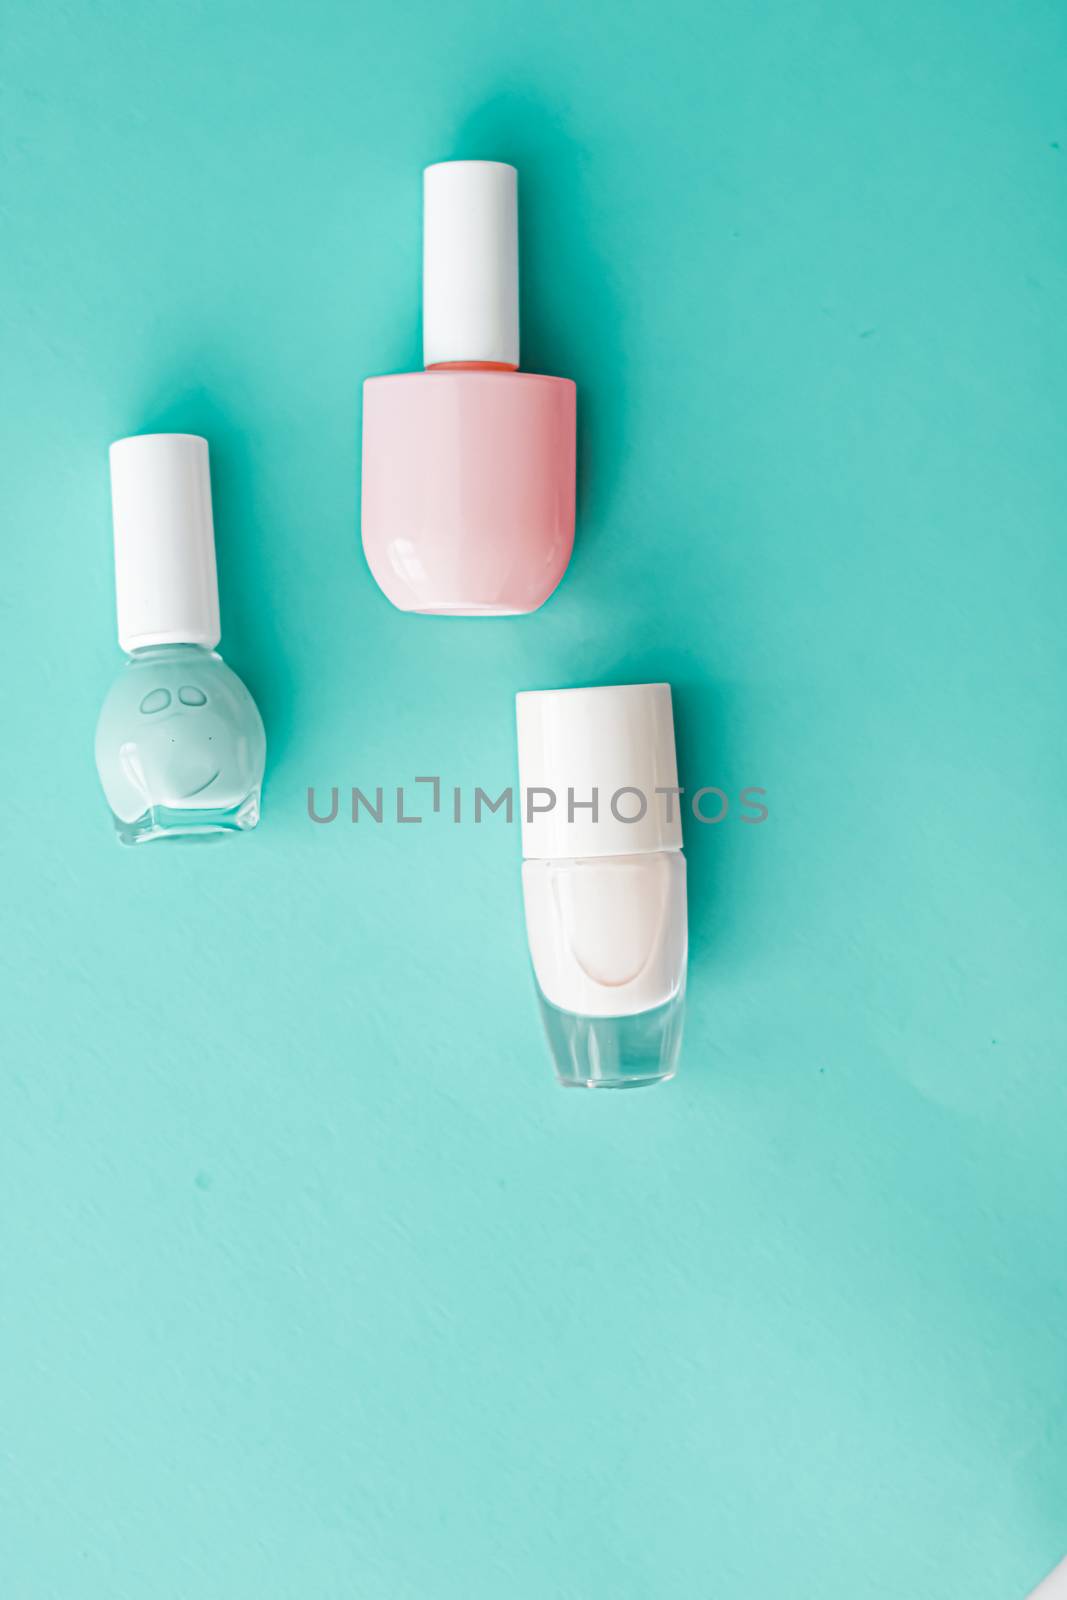 Nail polish bottles on green background, beauty brand by Anneleven